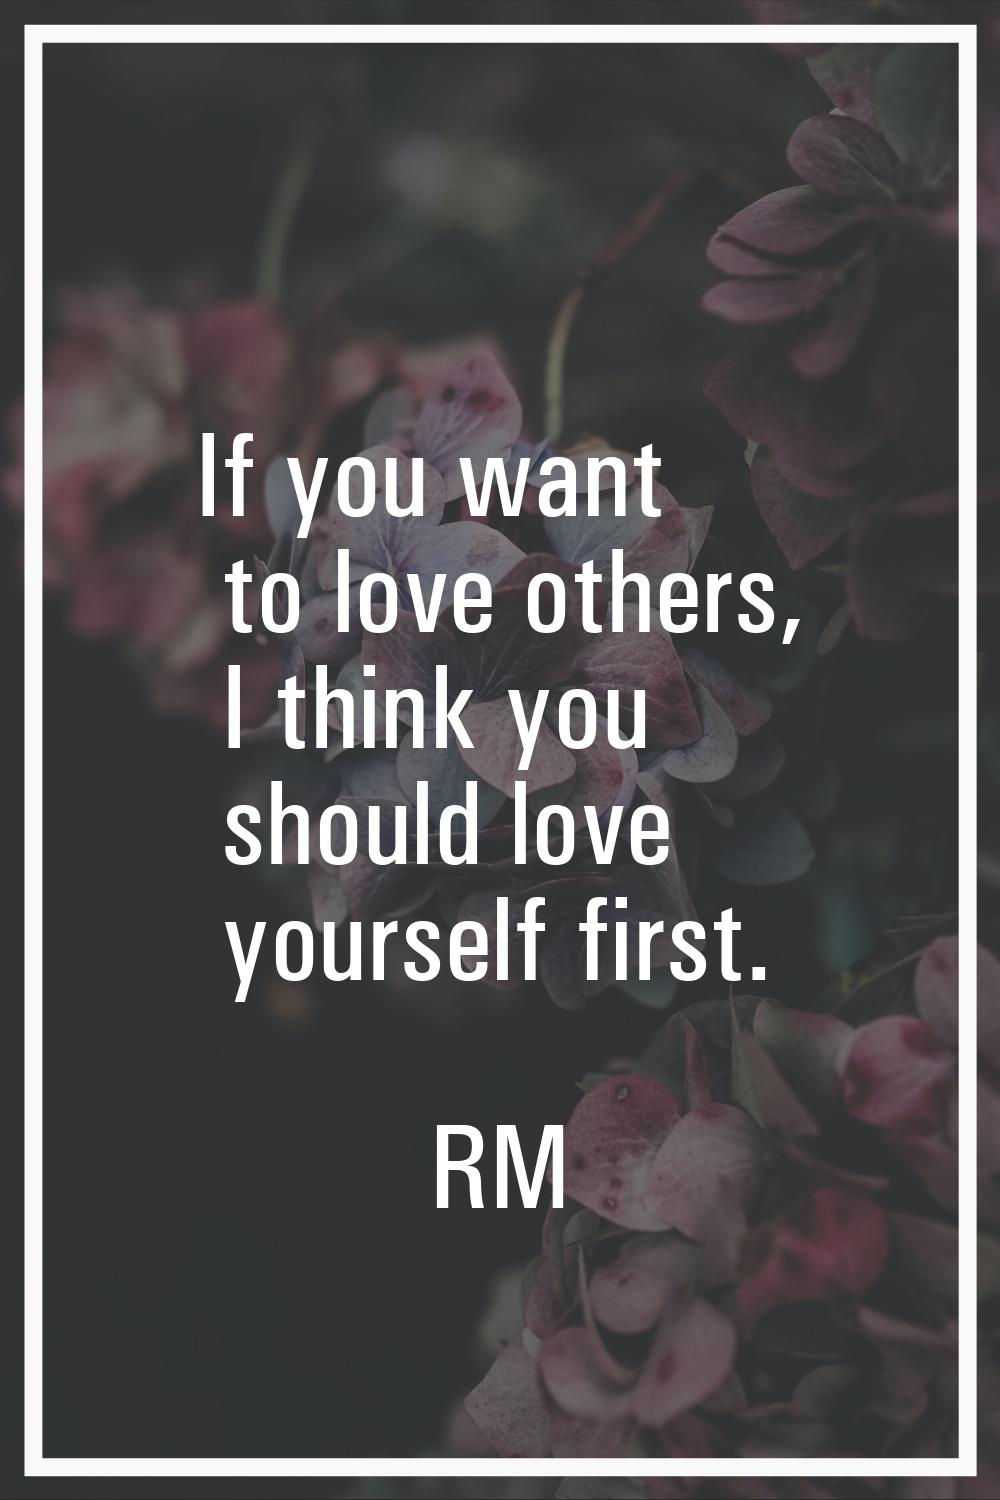 If you want to love others, I think you should love yourself first.